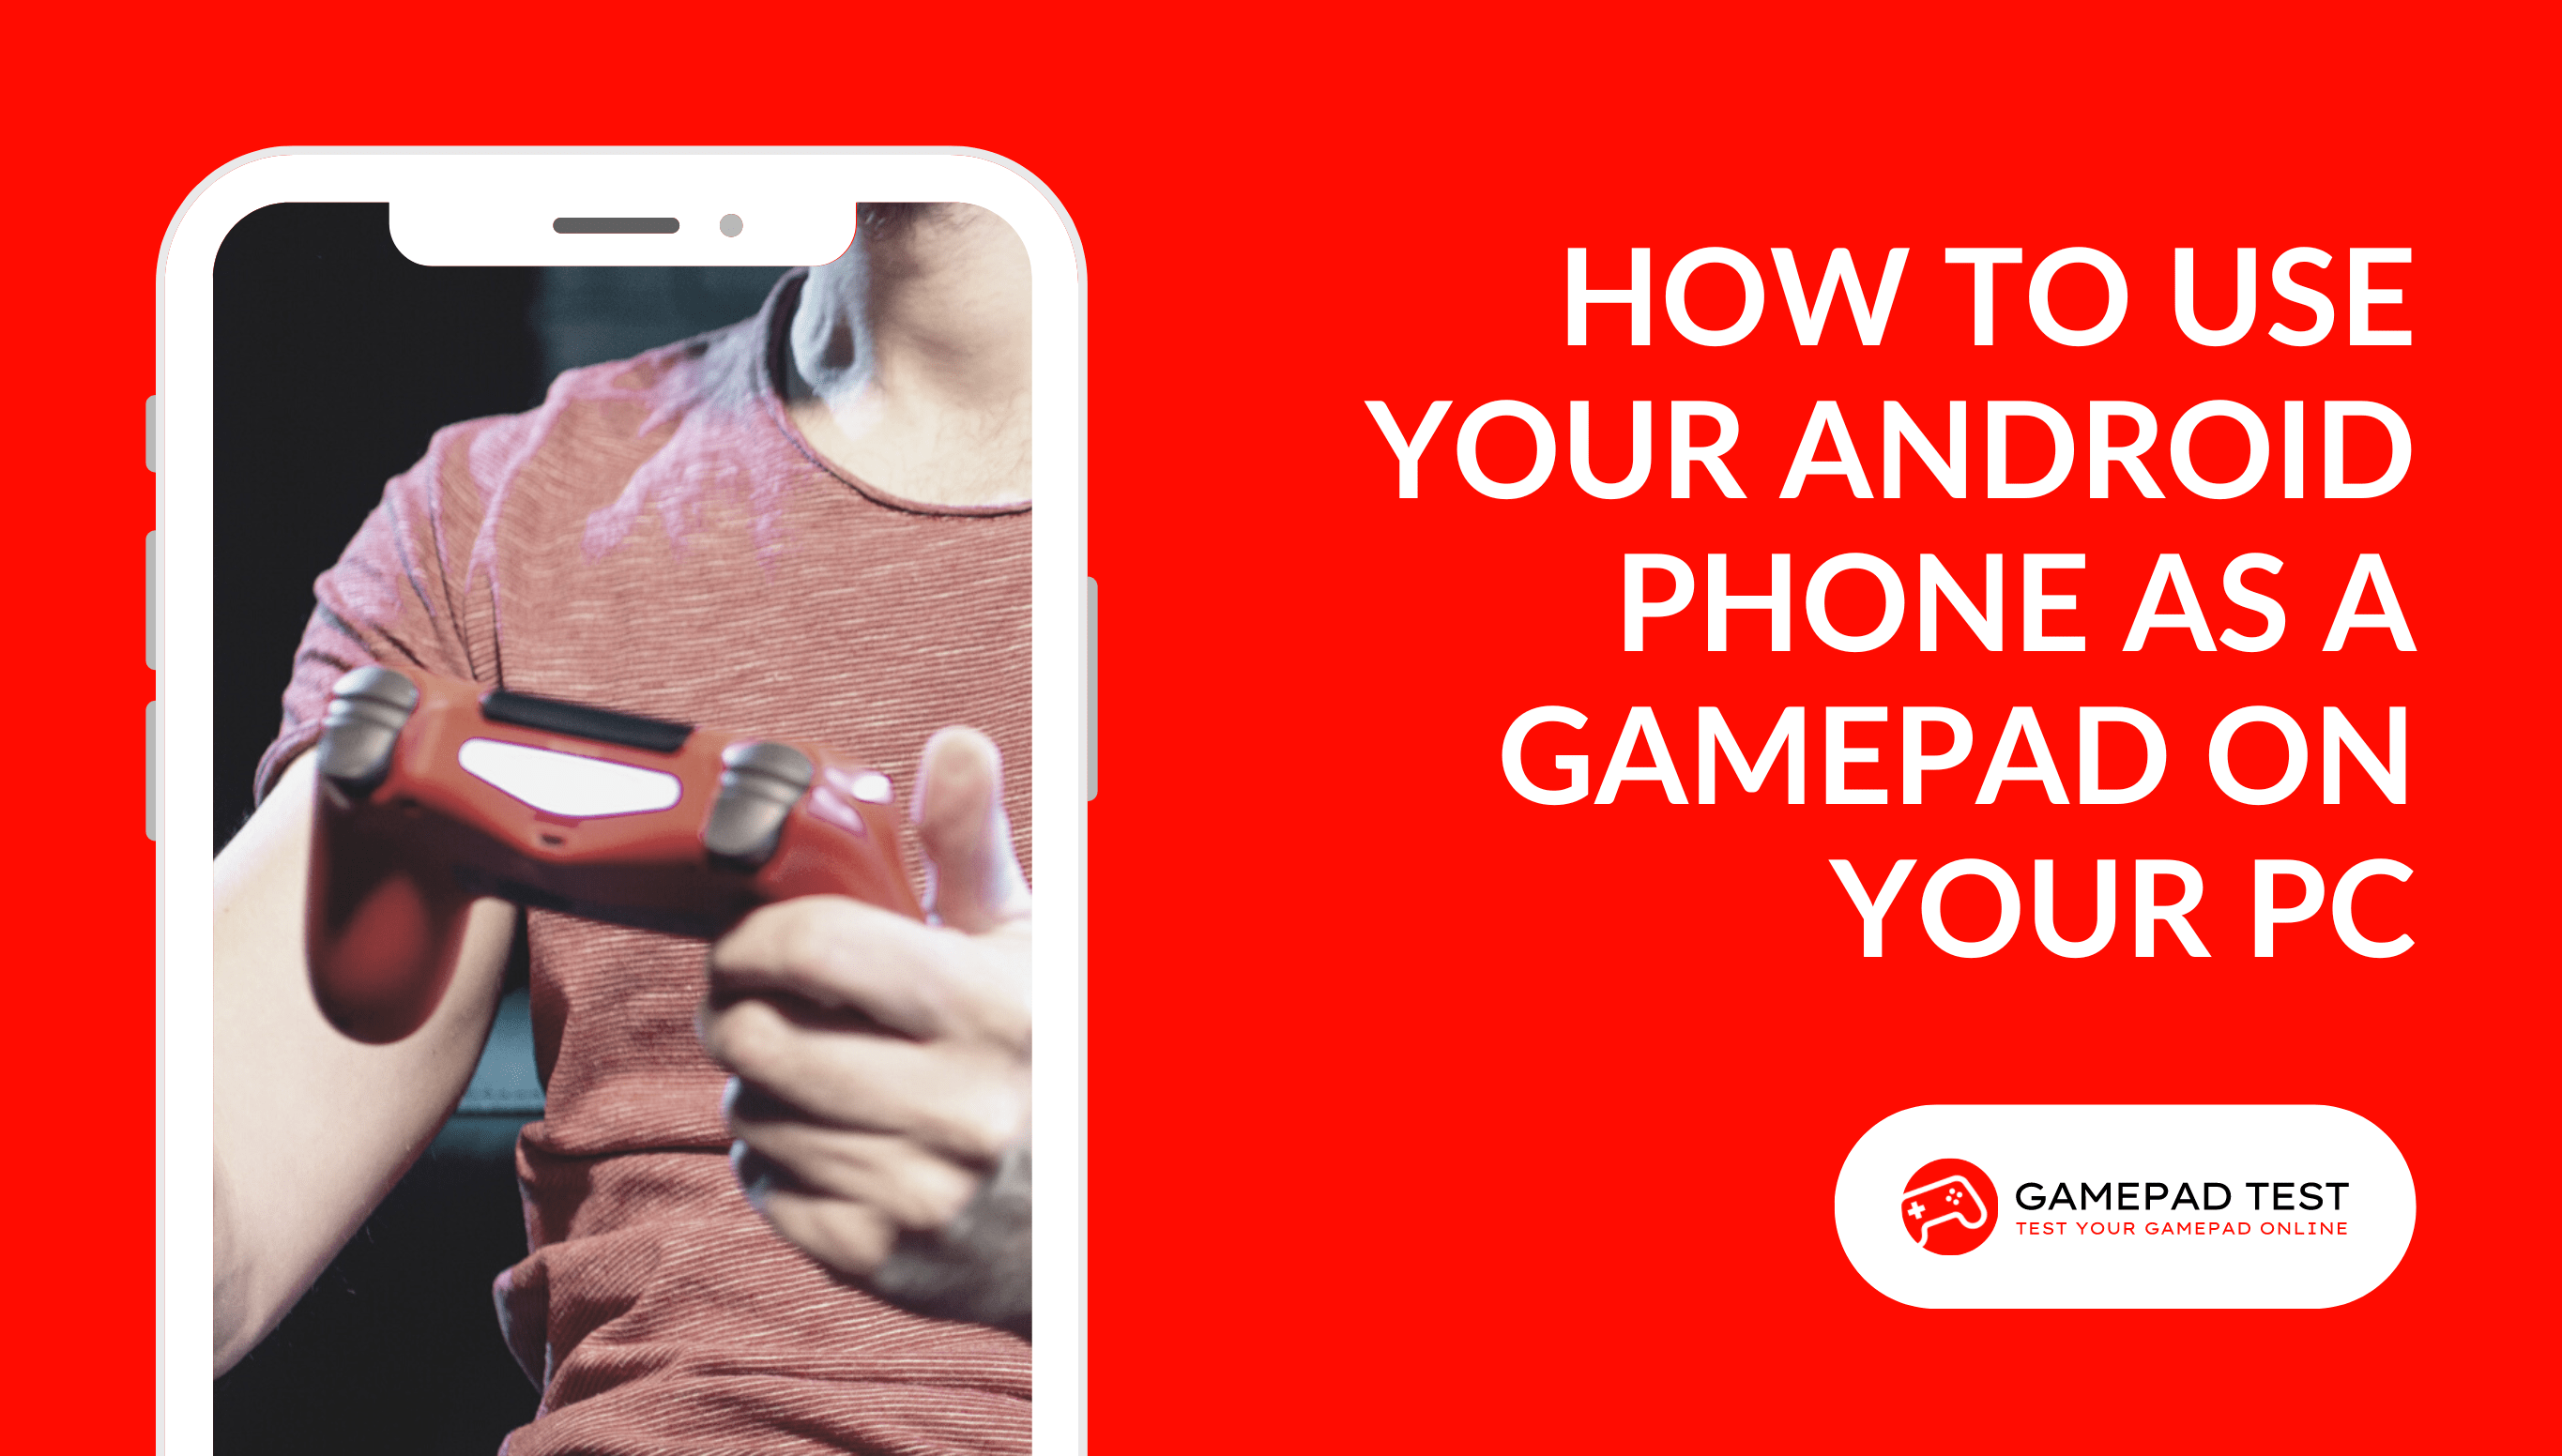 How to Use Your Android Phone As A Gamepad on Your PC - Blog Featured Image - gamepadtest.com